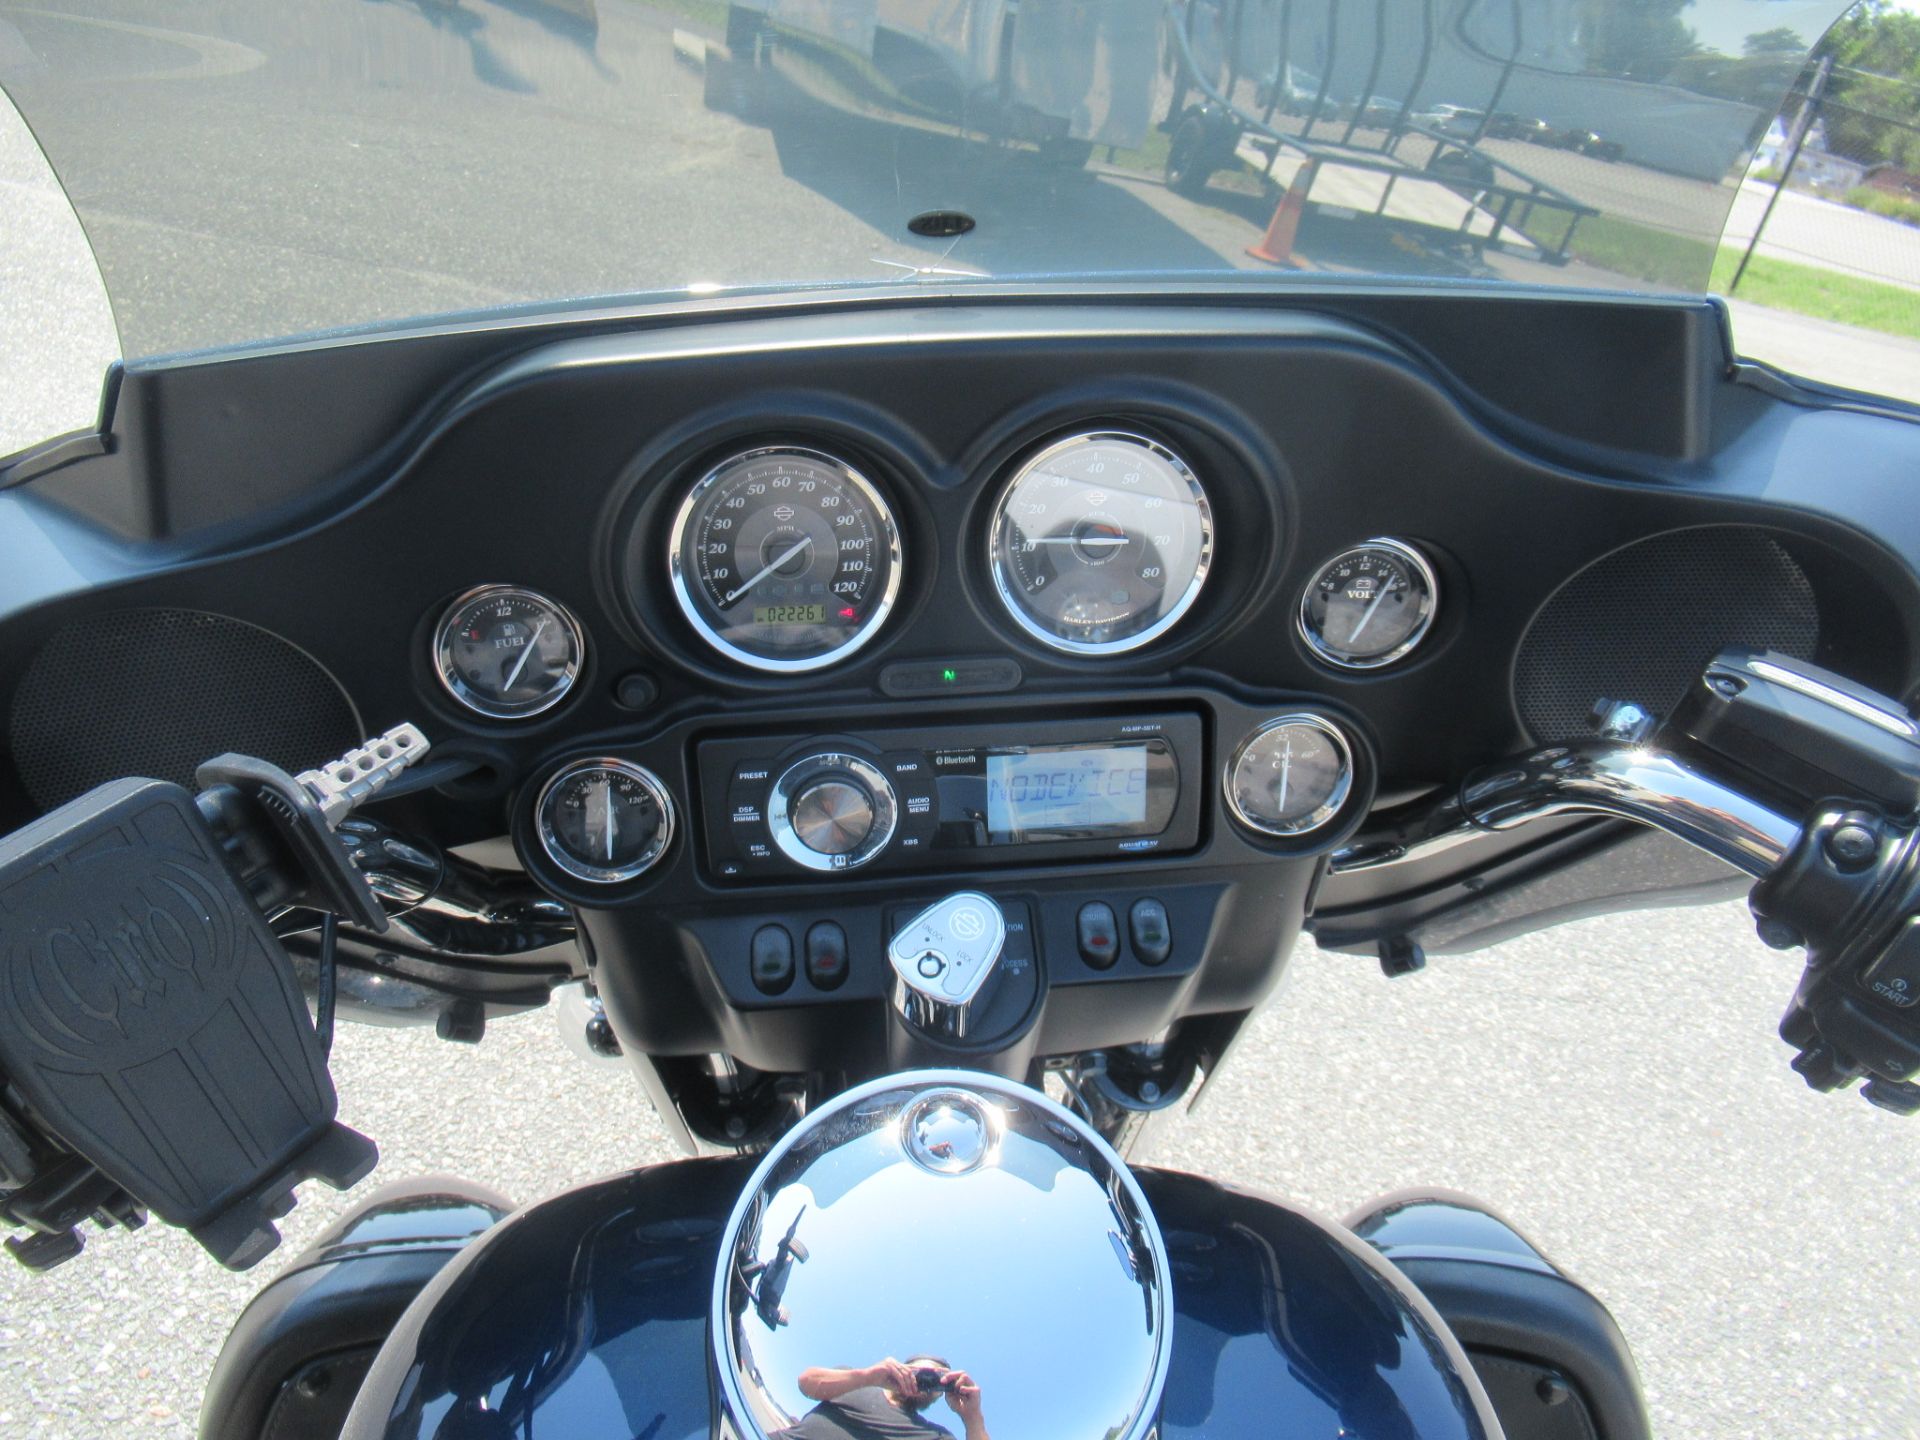 2013 Harley-Davidson Electra Glide® Ultra Limited in Springfield, Massachusetts - Photo 8